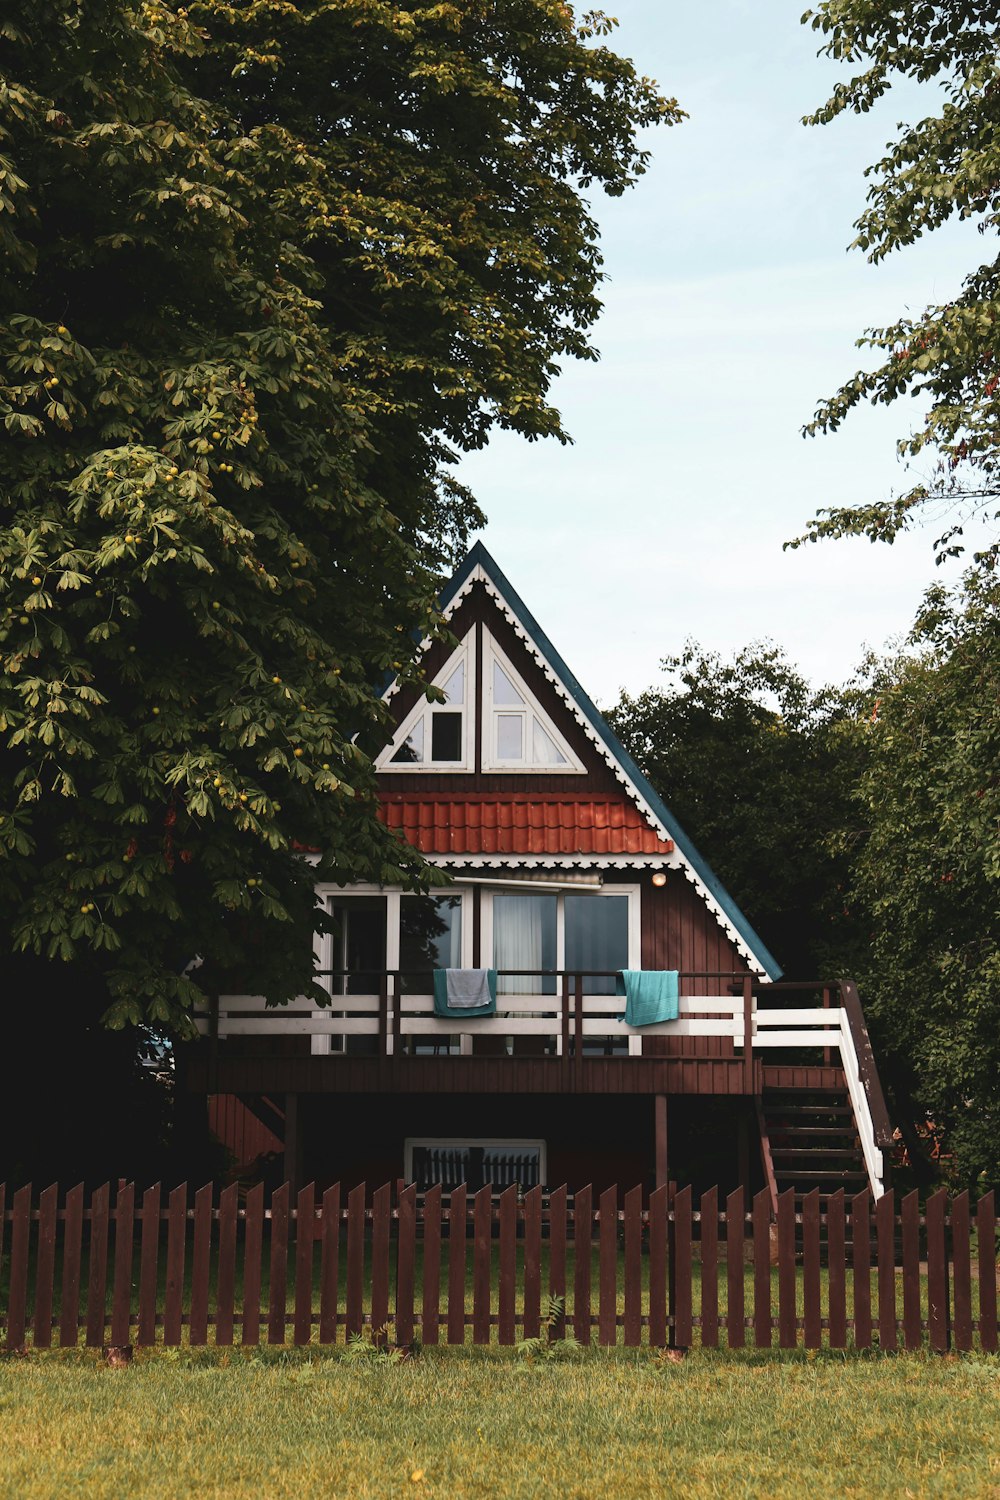 brown wooden house with wooden fence near tree